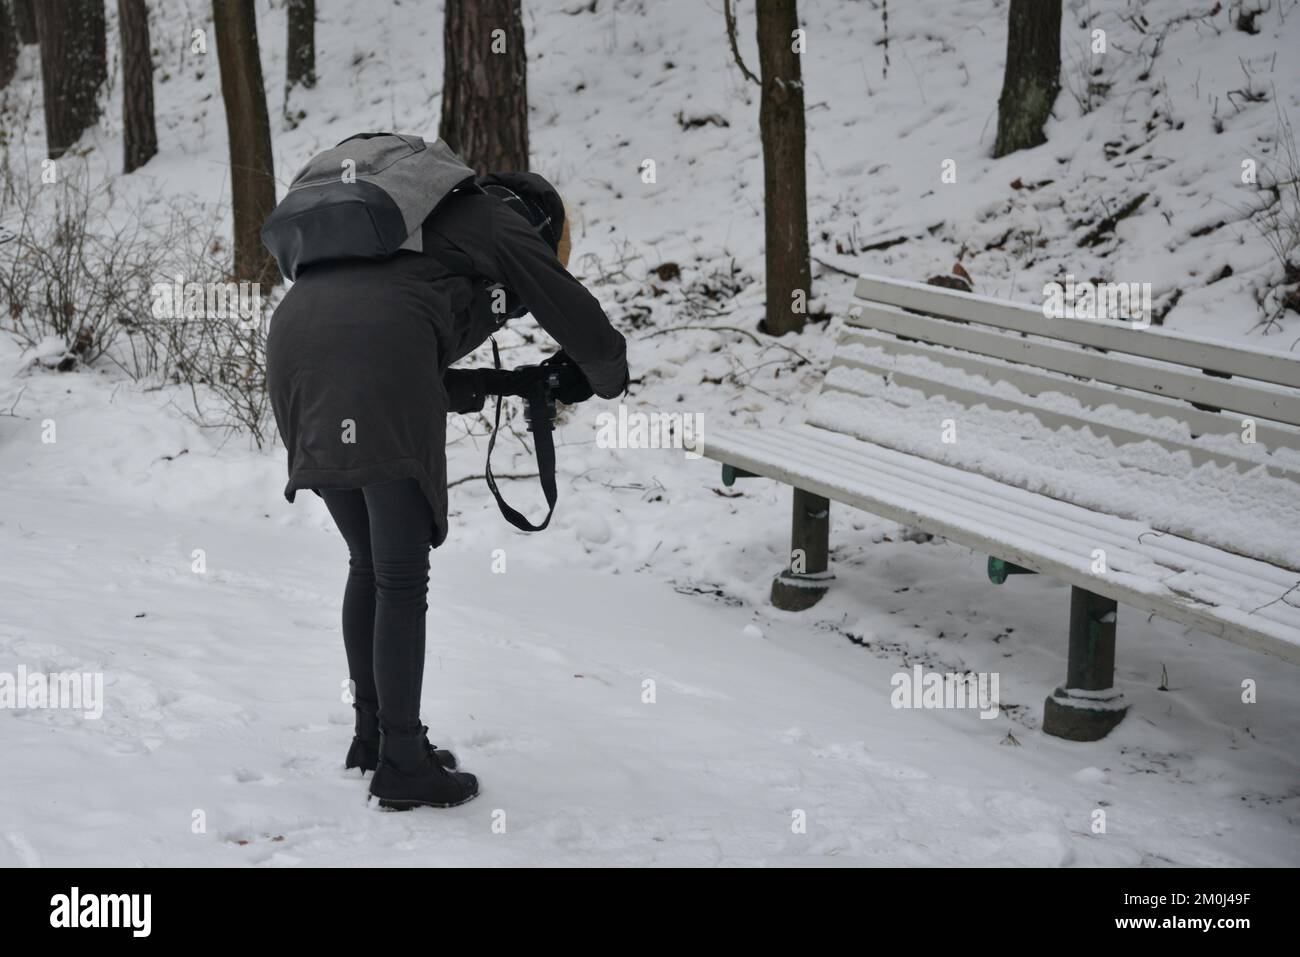 young girl photographer with a gray bag takes pictures of a snowy wooden bench in the park. Stock Photo